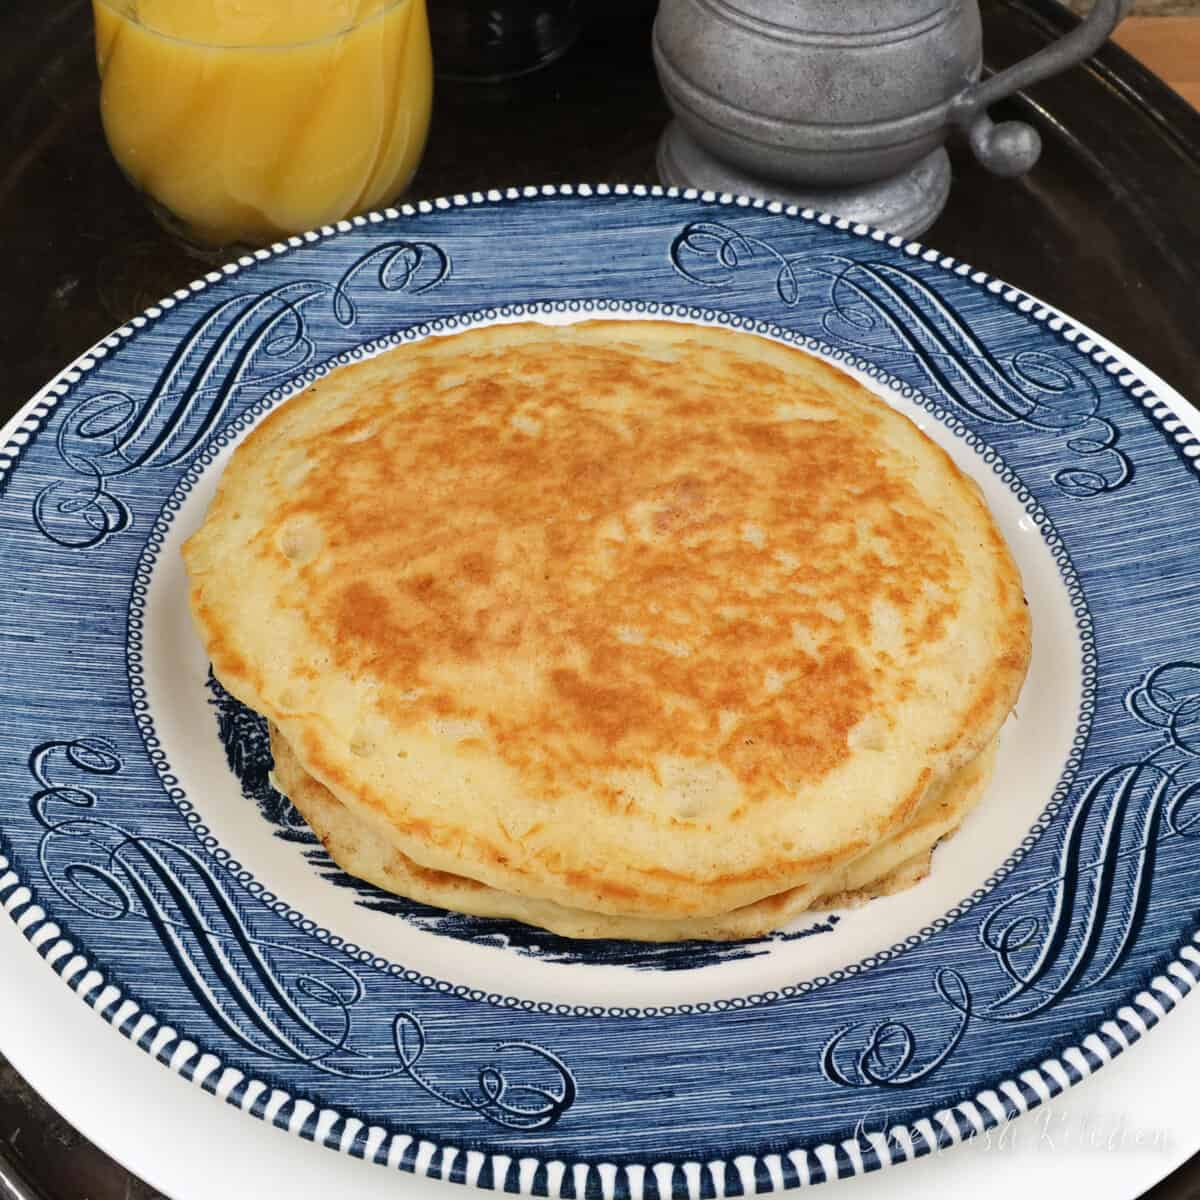 two buttermilk pancakes on a blue plate next to a glass of orange juice and a silver container of syrup